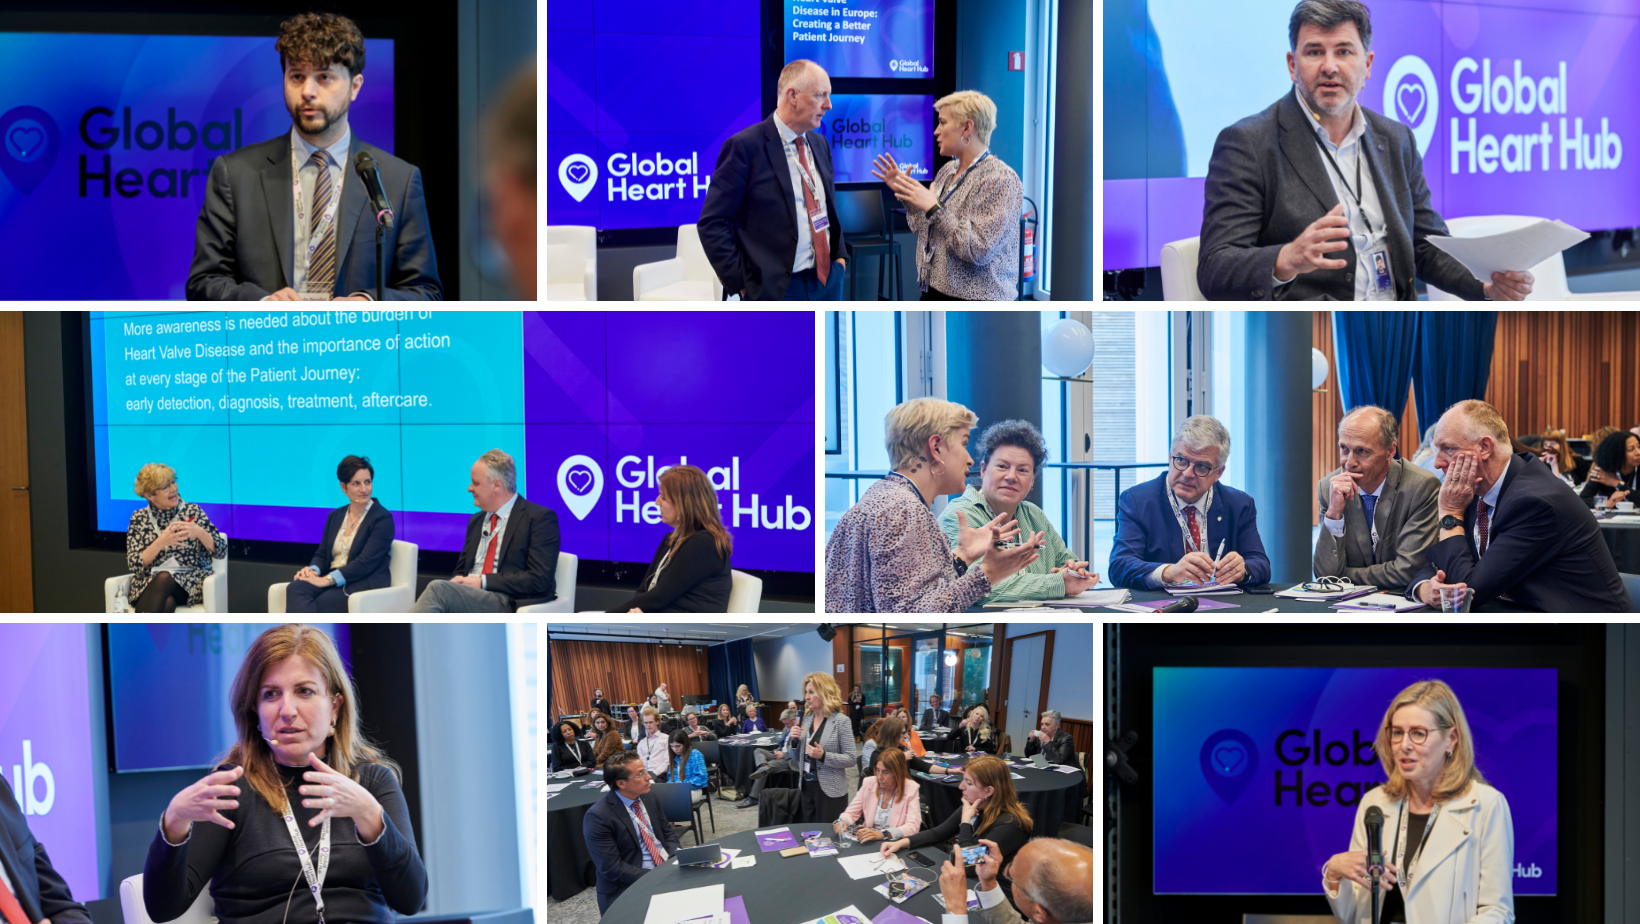 The Global Heart Hub was delighted to co-host a special event in Brussels on “Heart Valve Disease in Europe: Creating A Better Patient Journey” on 27 April 2022